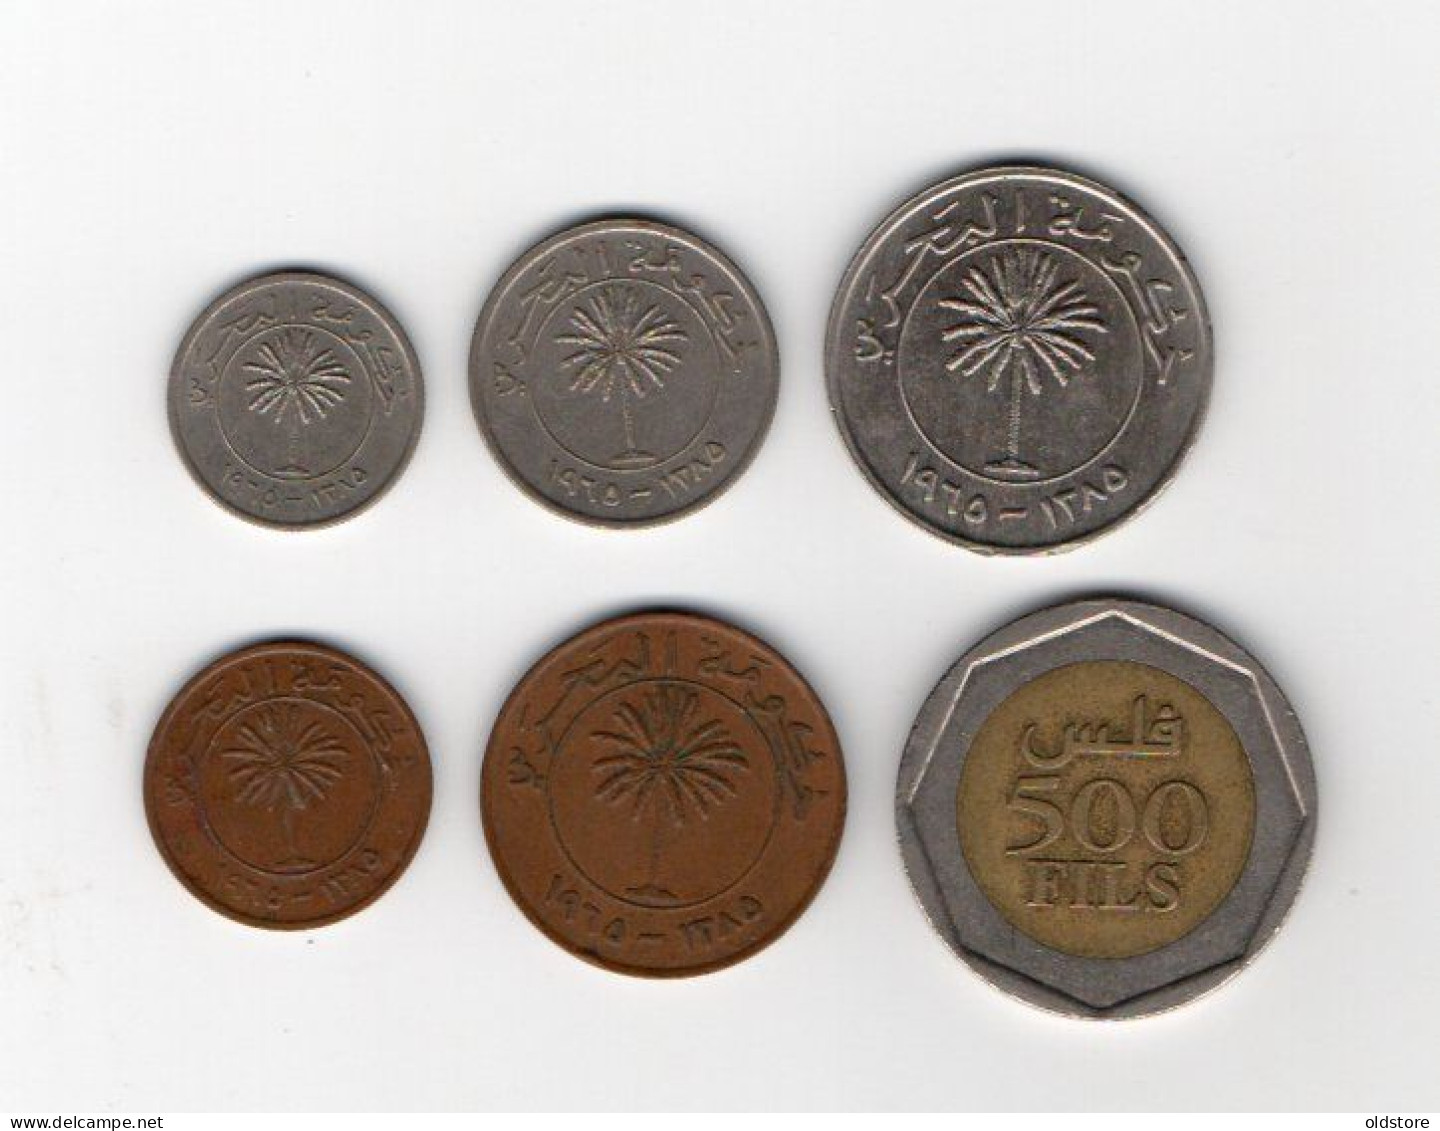 Bahrain Coins - Set Of 6 Pecs - From 5 Fils To 100 Fils First Issue Year 1965 + 500 Fils Year 2000 - Bahrein